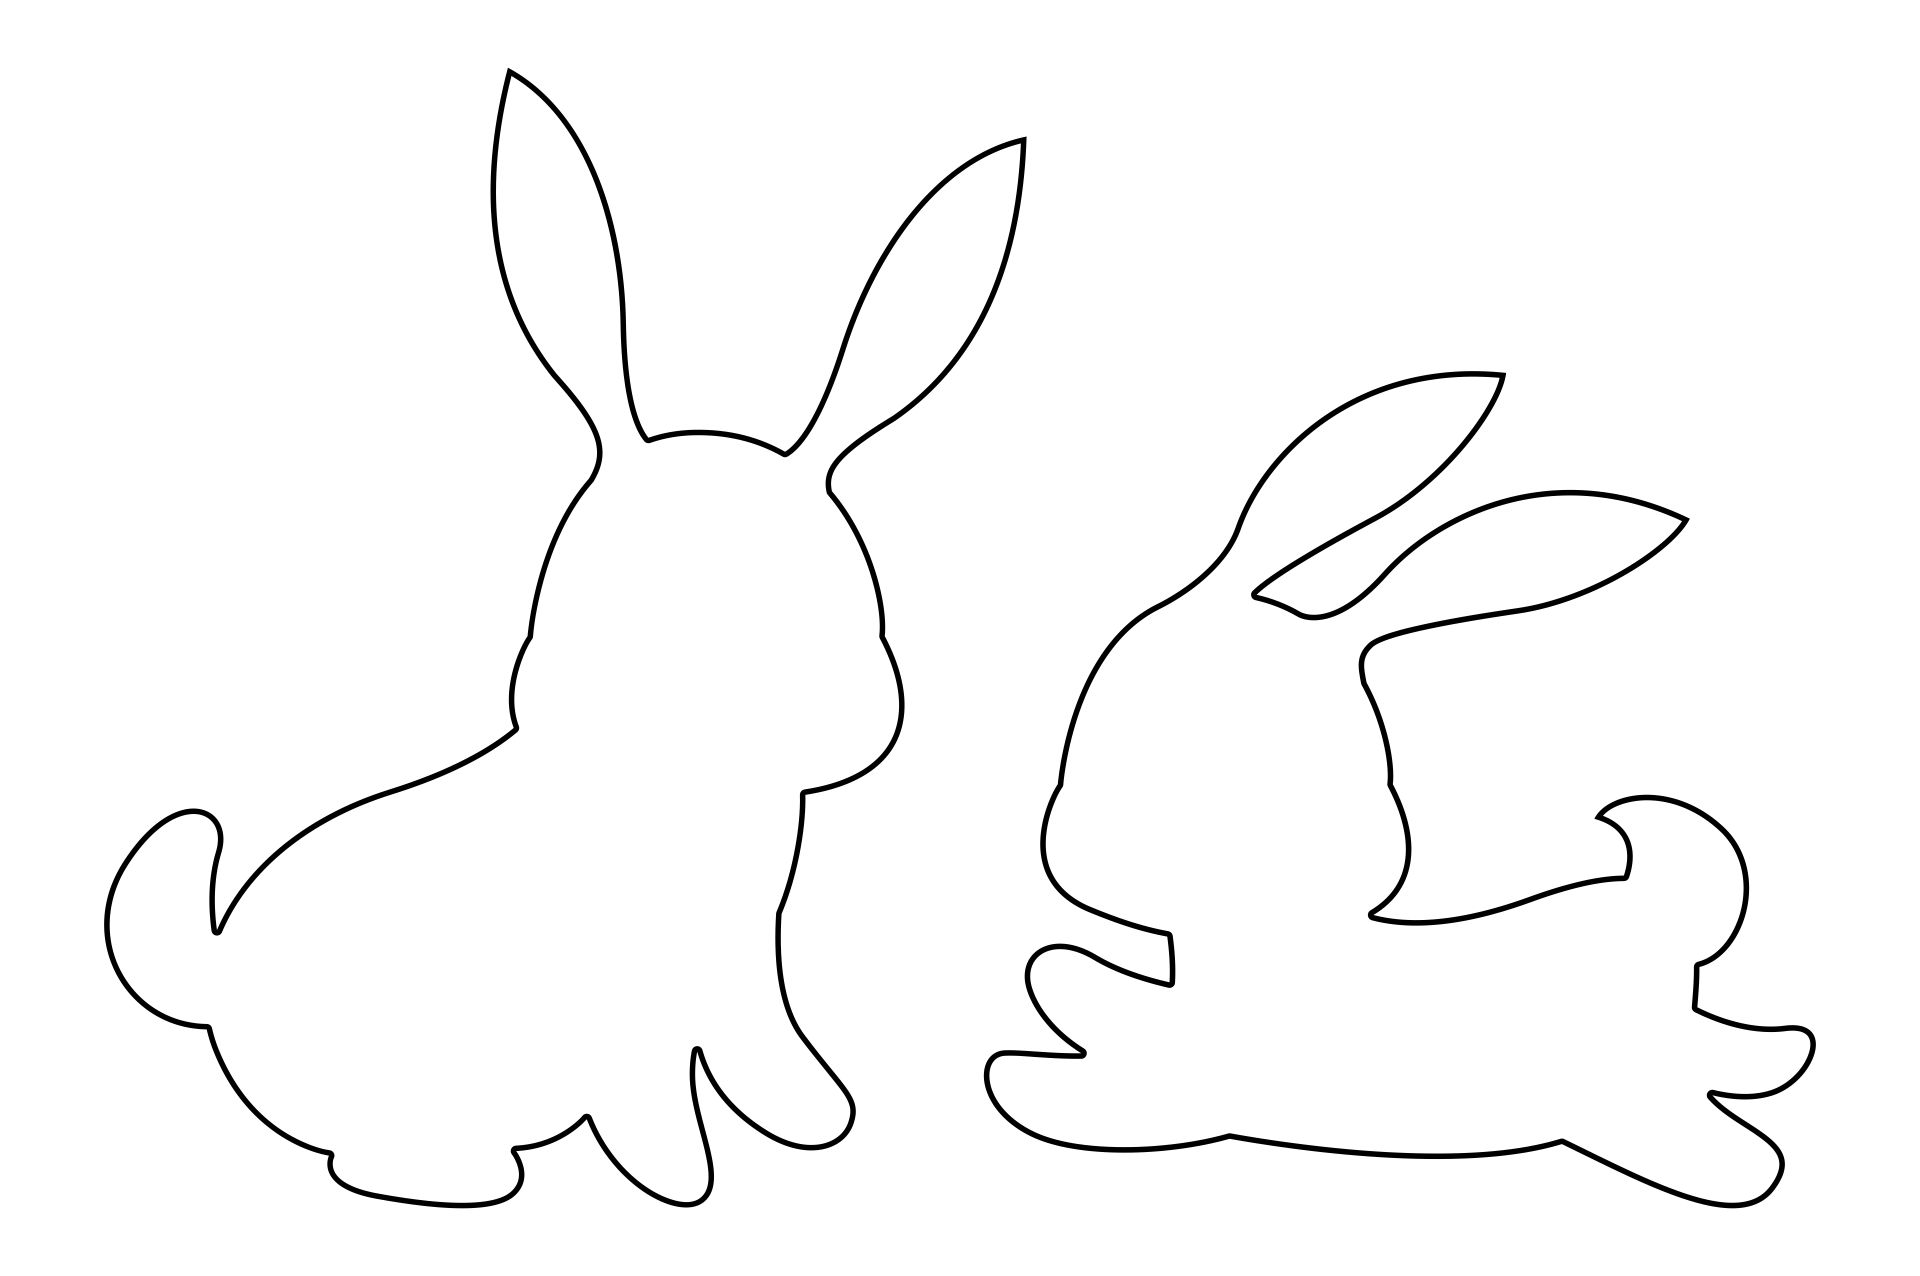 7 Best Images of Bunny Art Free Printables Free Bunny Silhouette